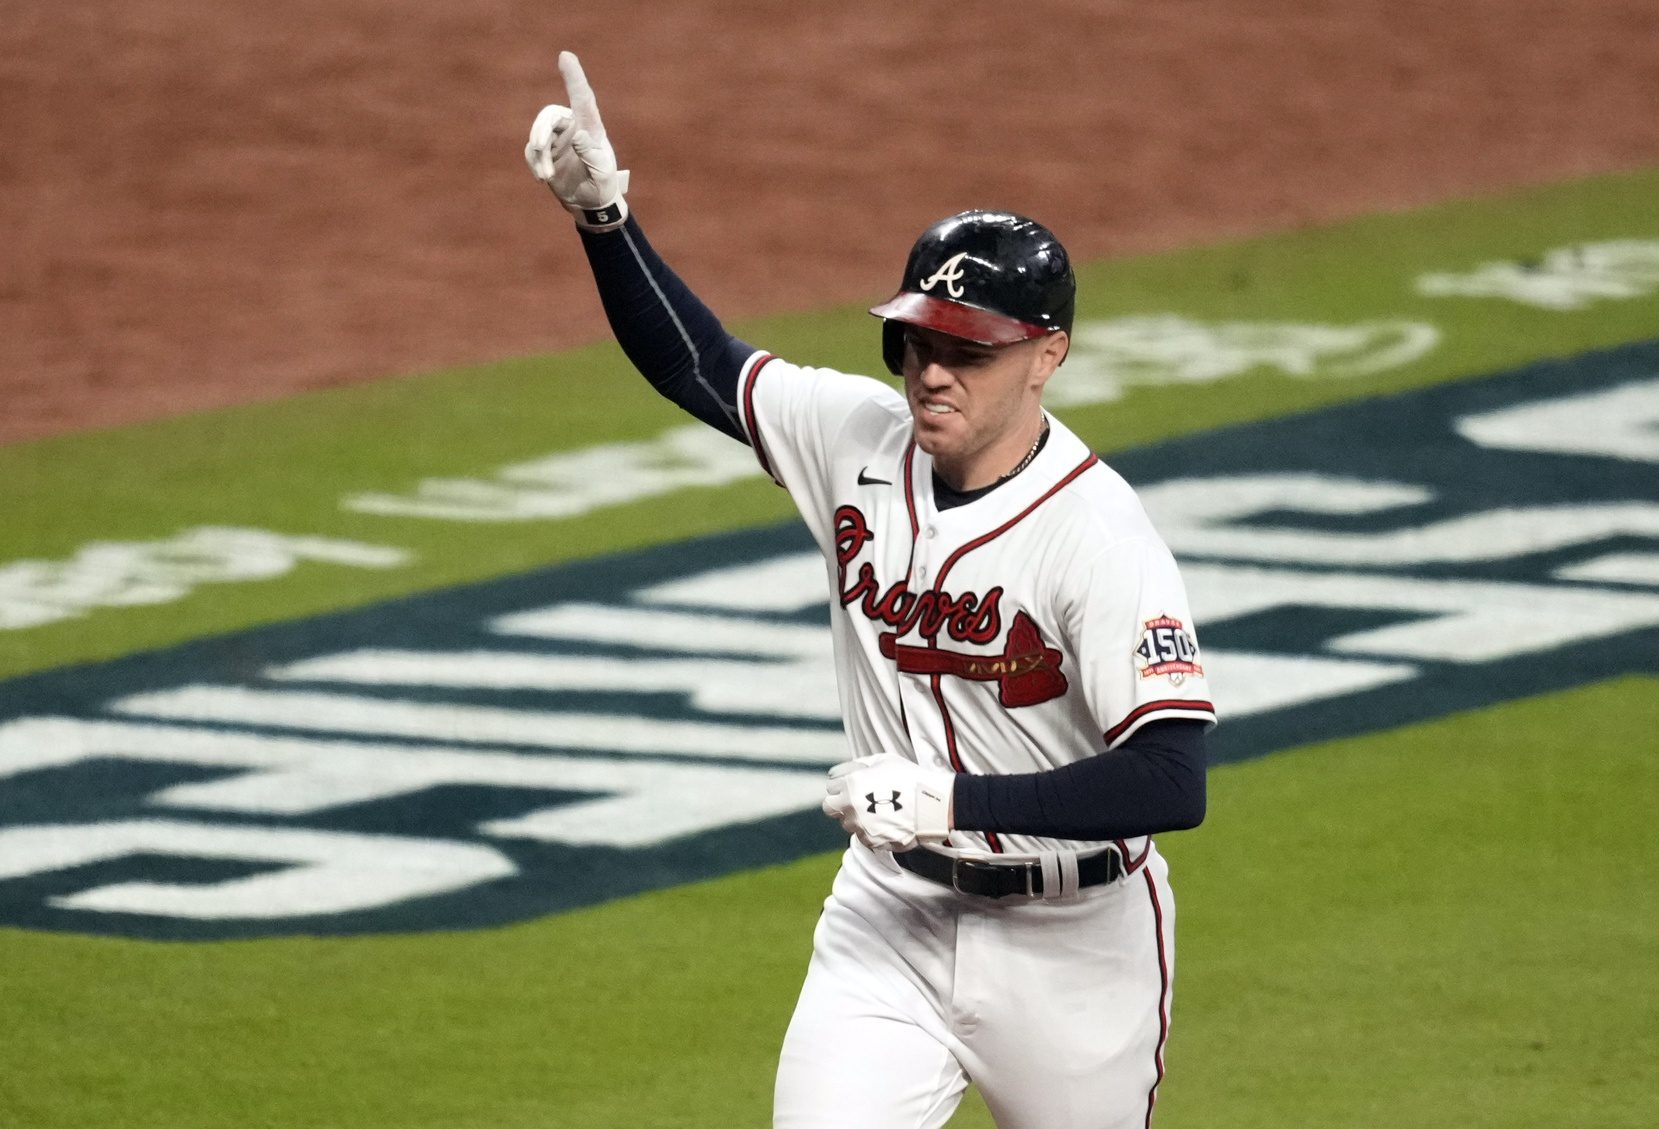 Mixed emotions for the official end of the Freddie Freeman Braves